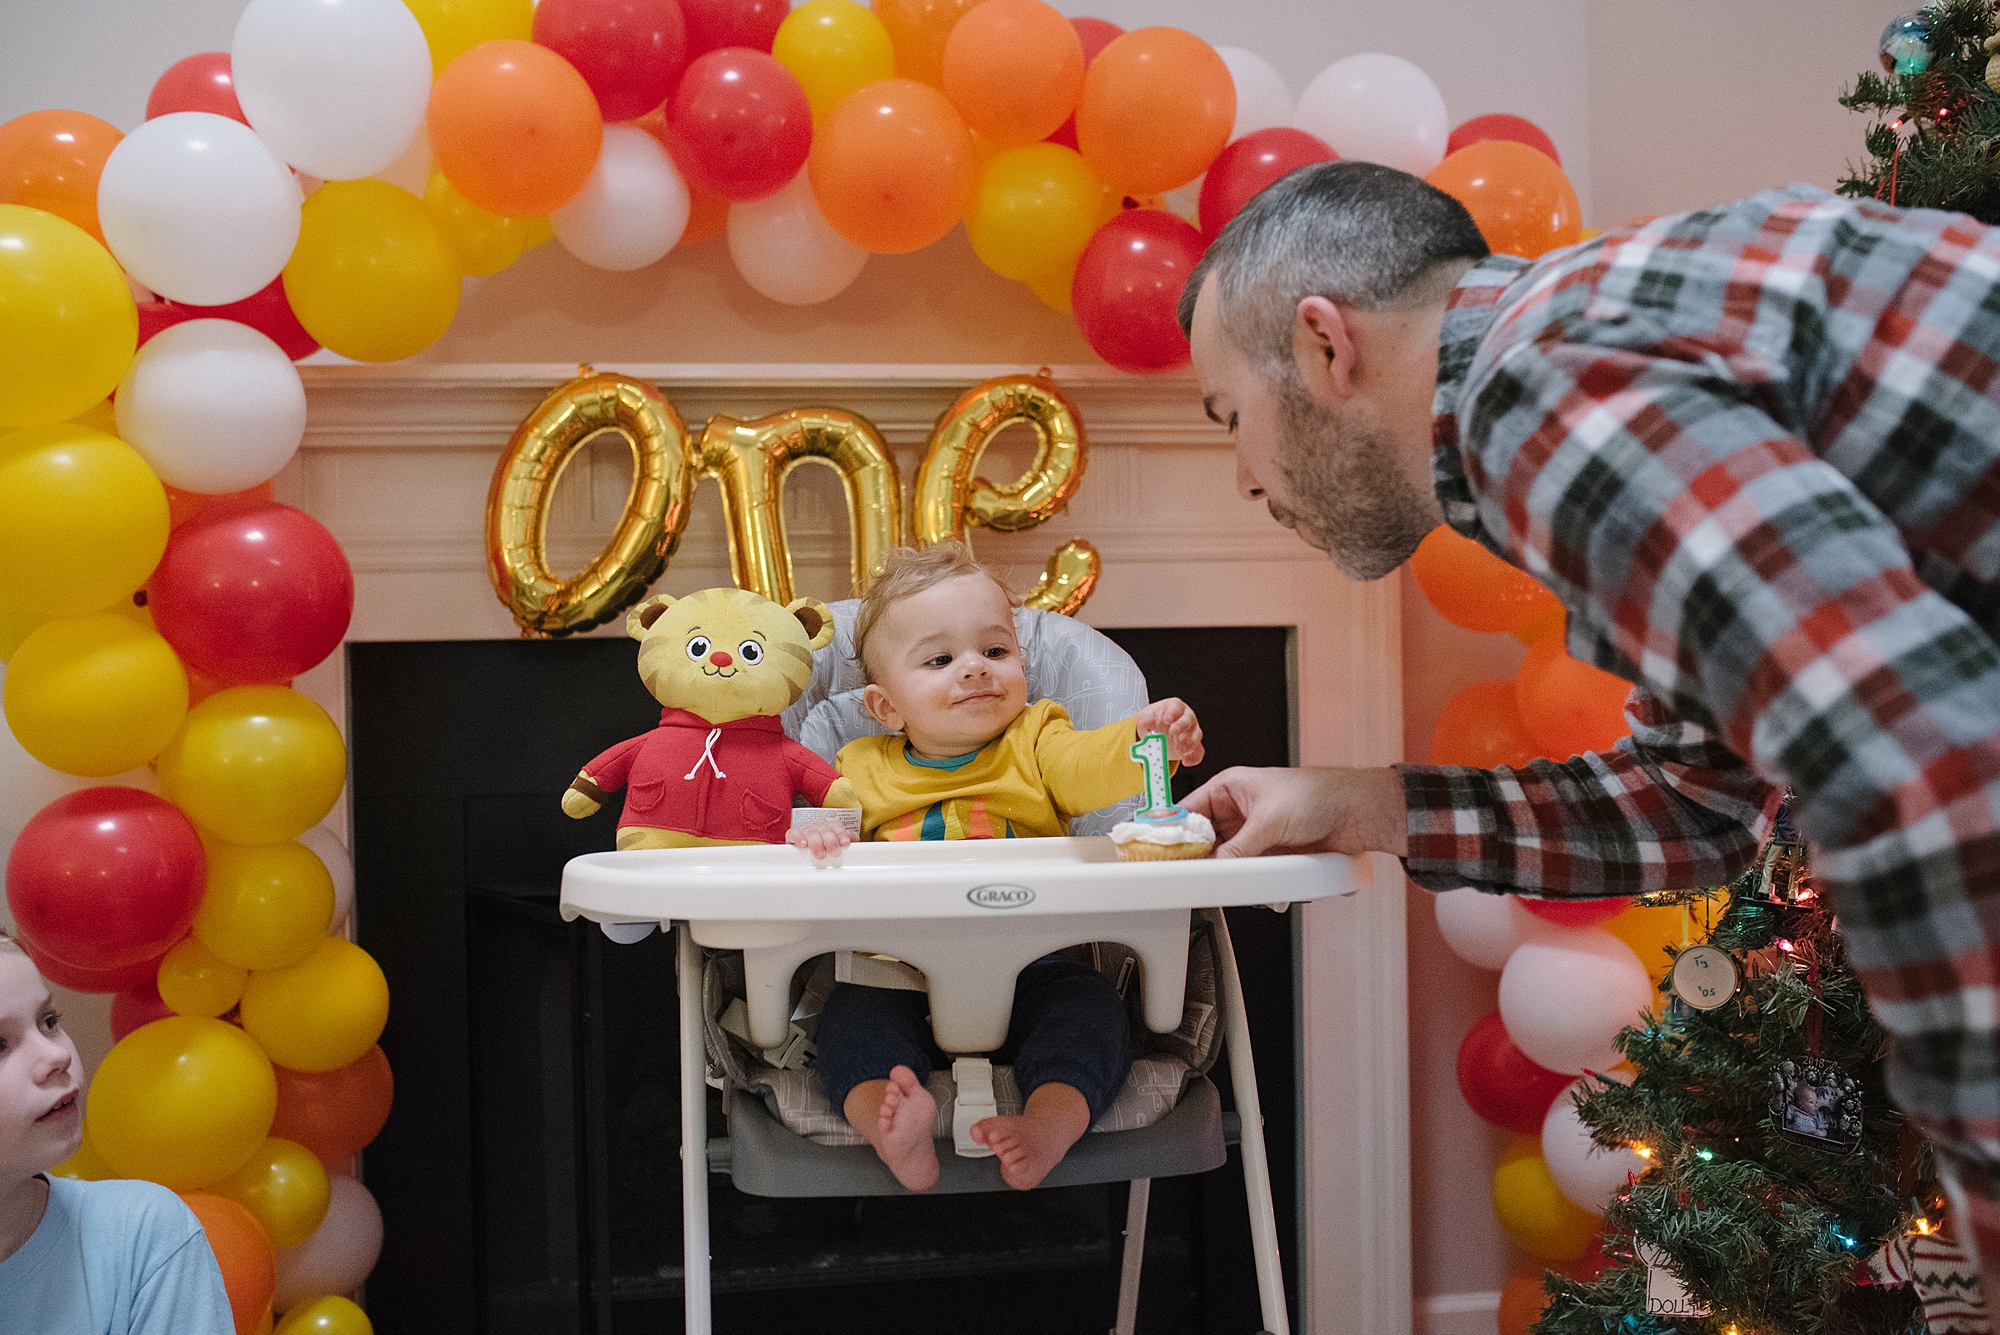 Daniel Tiger Themed Birthday Party over The Holiday Season in Nashville Tennessee by Dolly DeLong Photography Nashville Family Photographer